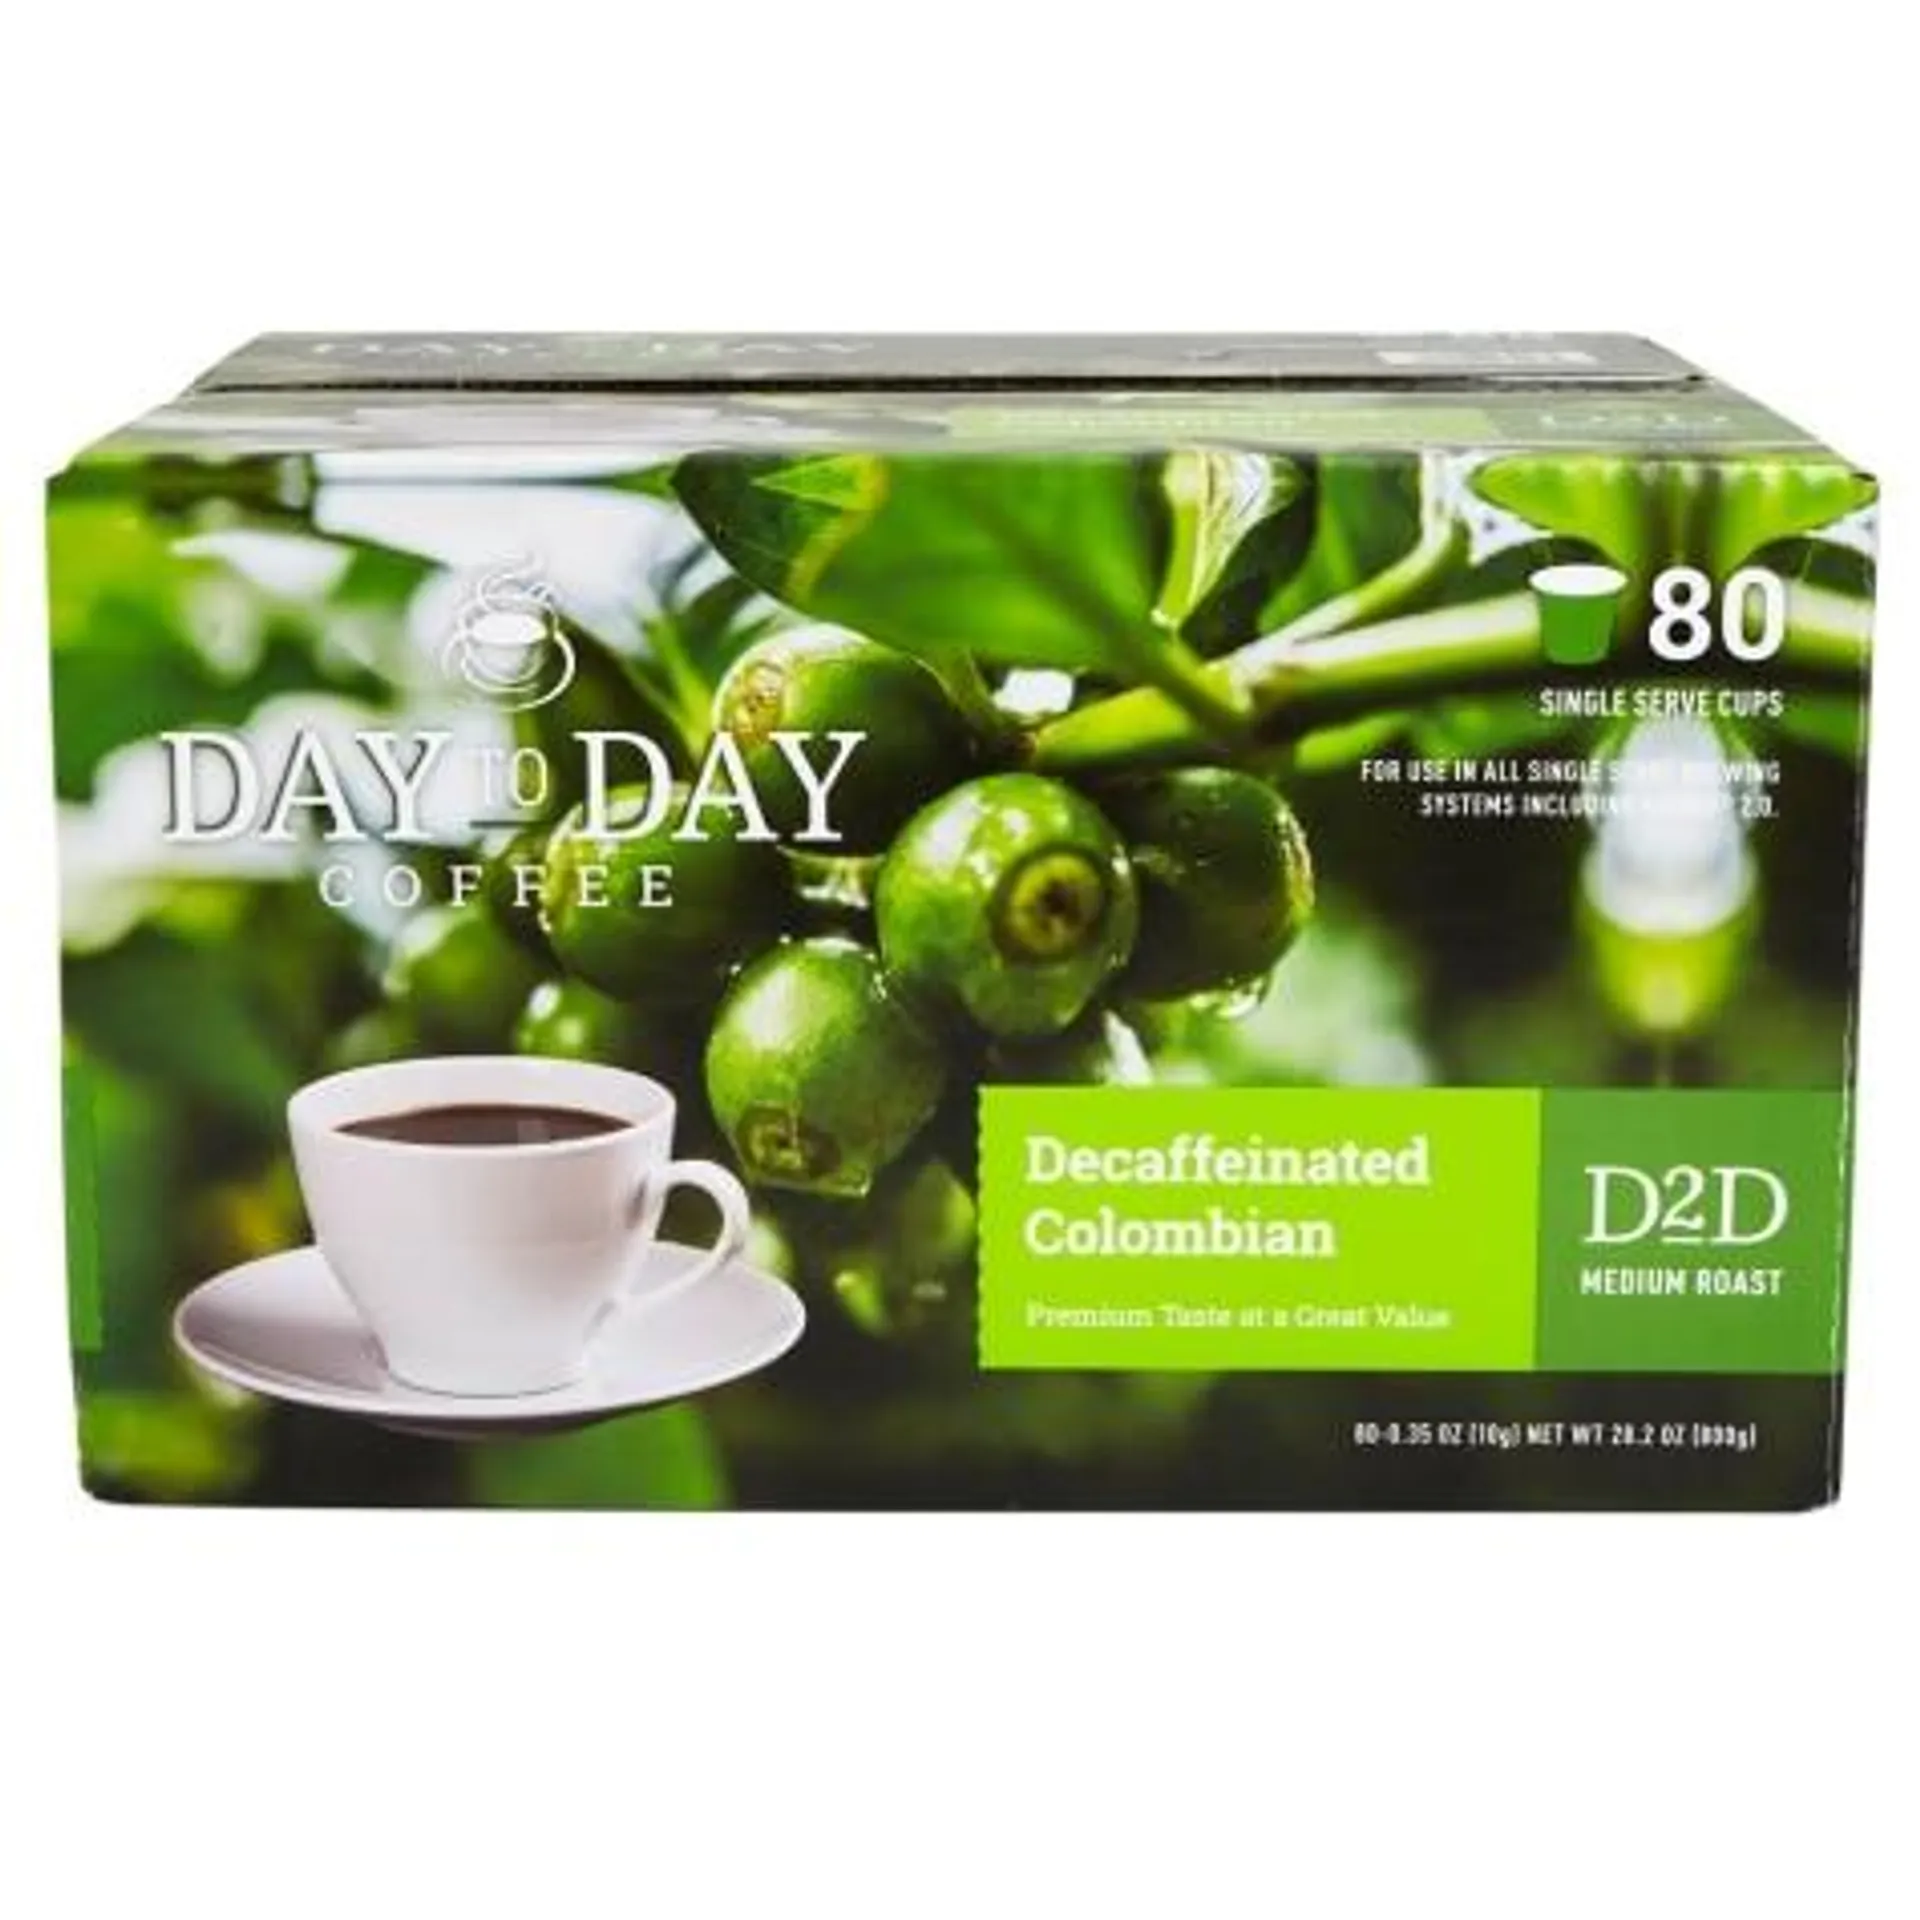 Day to Day Decaffeinated Colombian Coffee, 80 Count